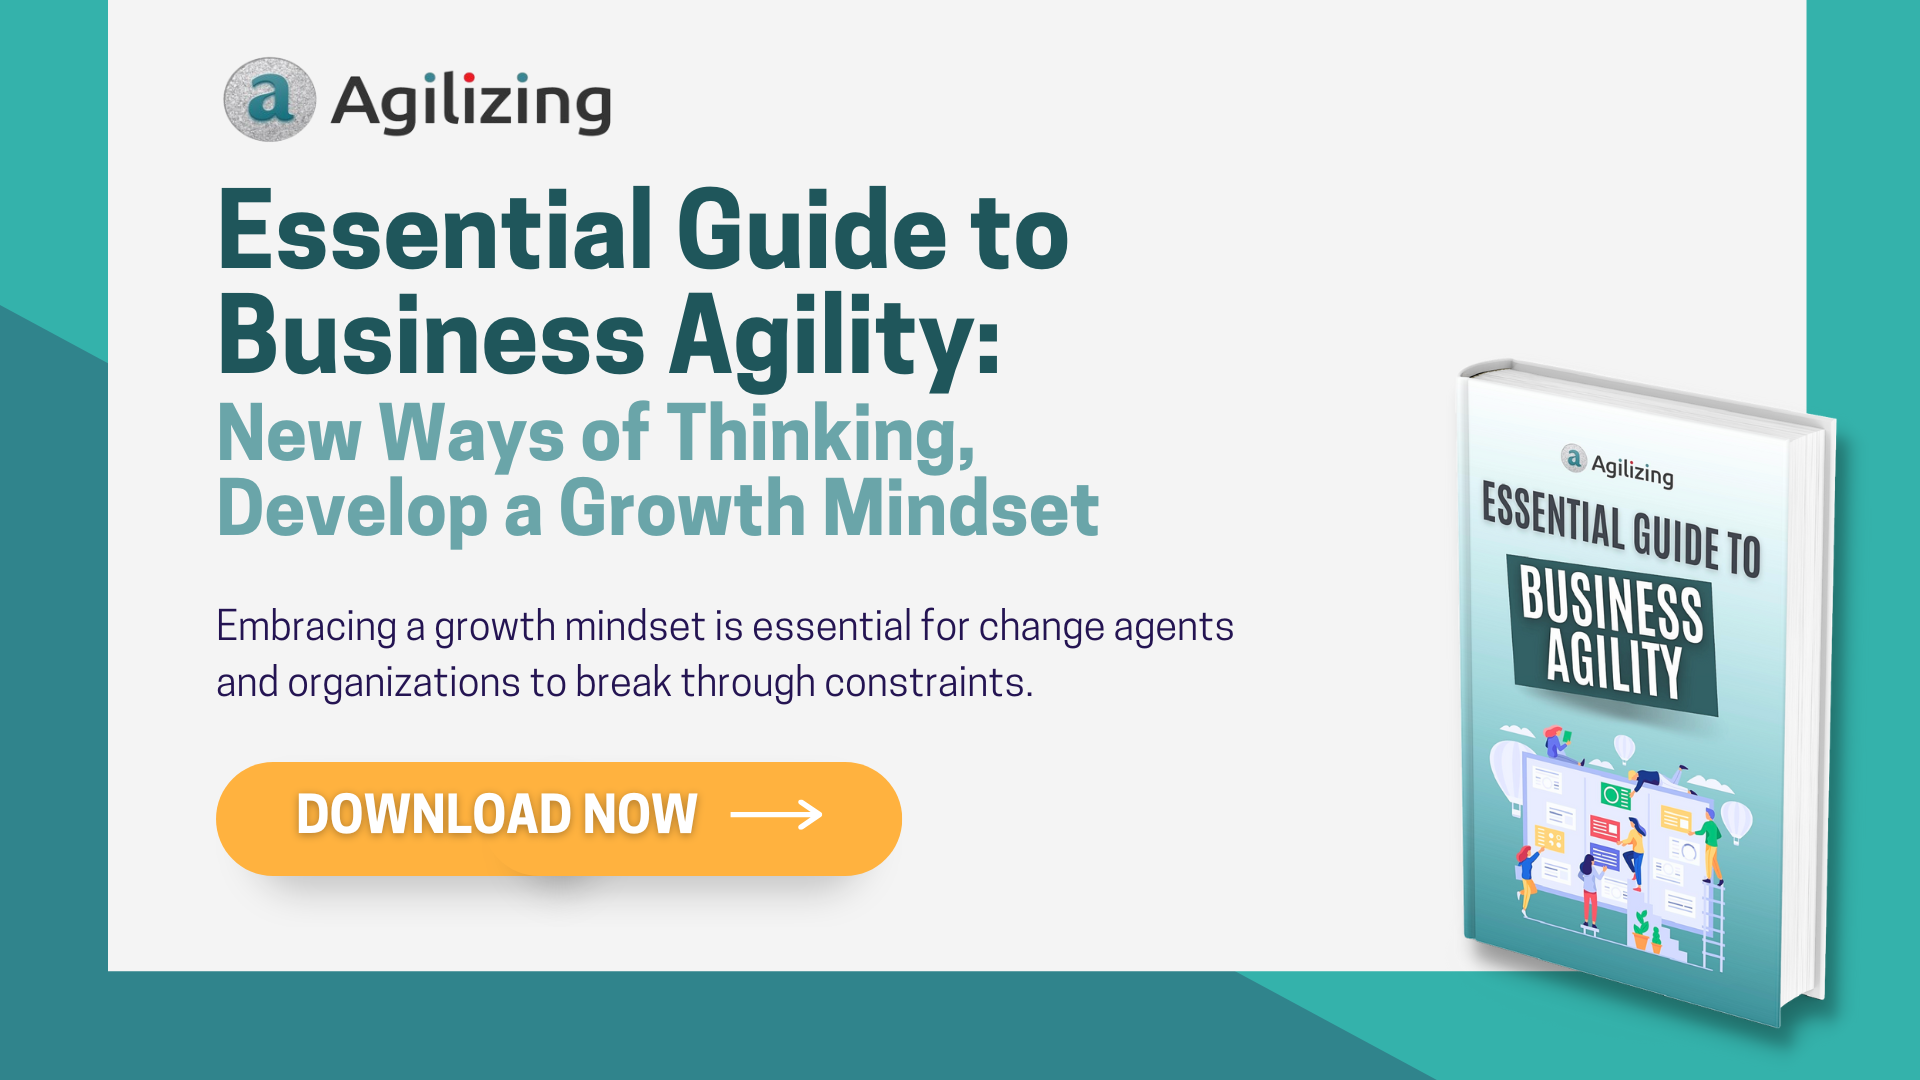 Essential Guide to Business Agility_Growth Mindset_P.10_ENG_Agilizing